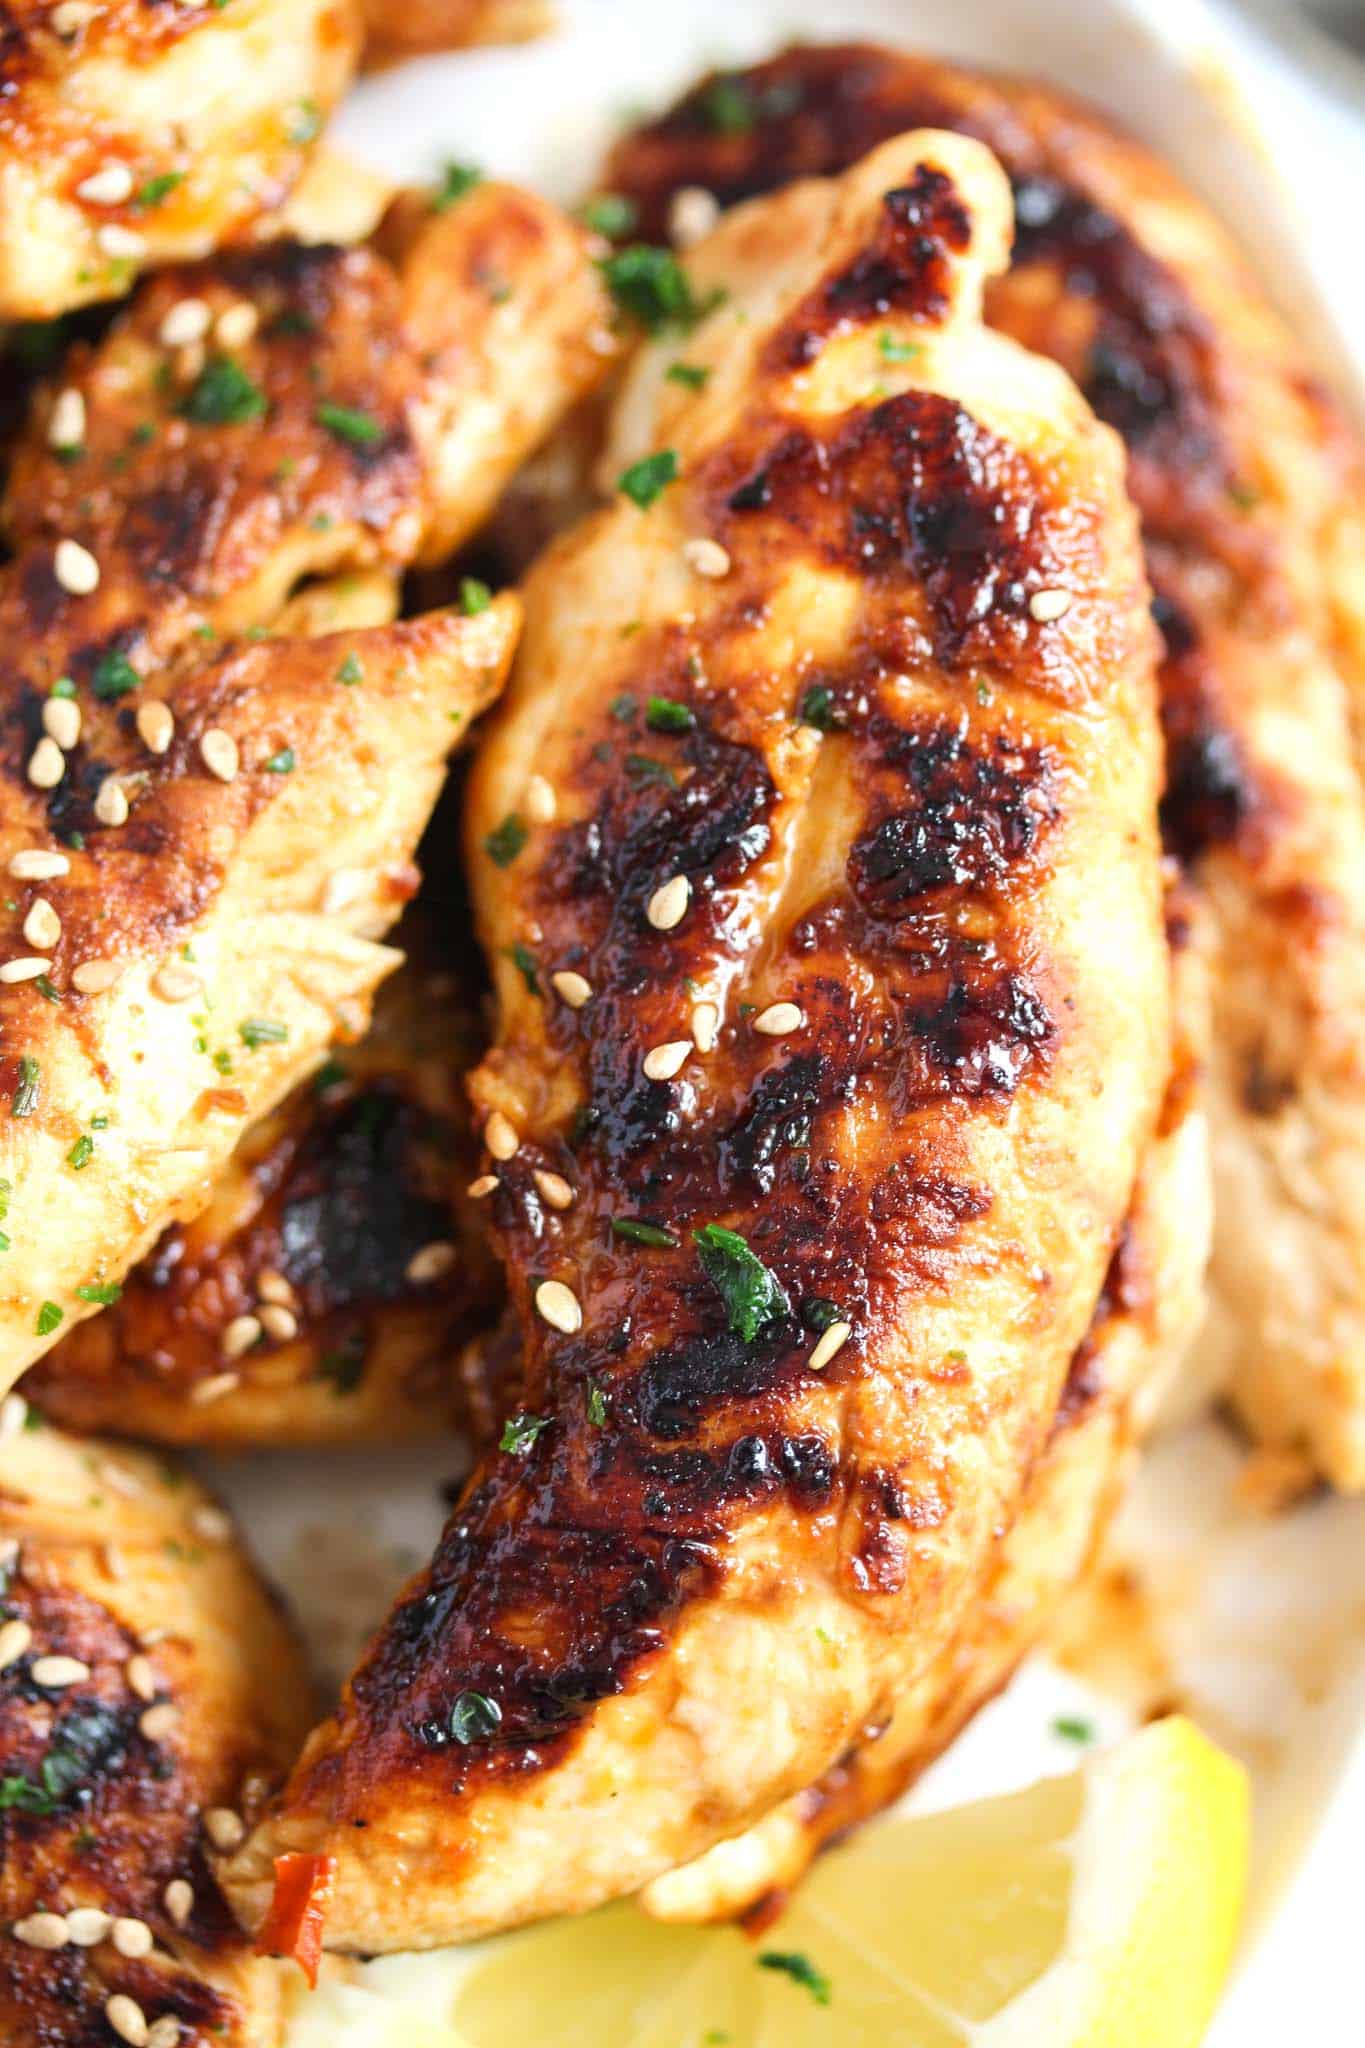 close up image of one grillled chicken tenders shiny and charred.